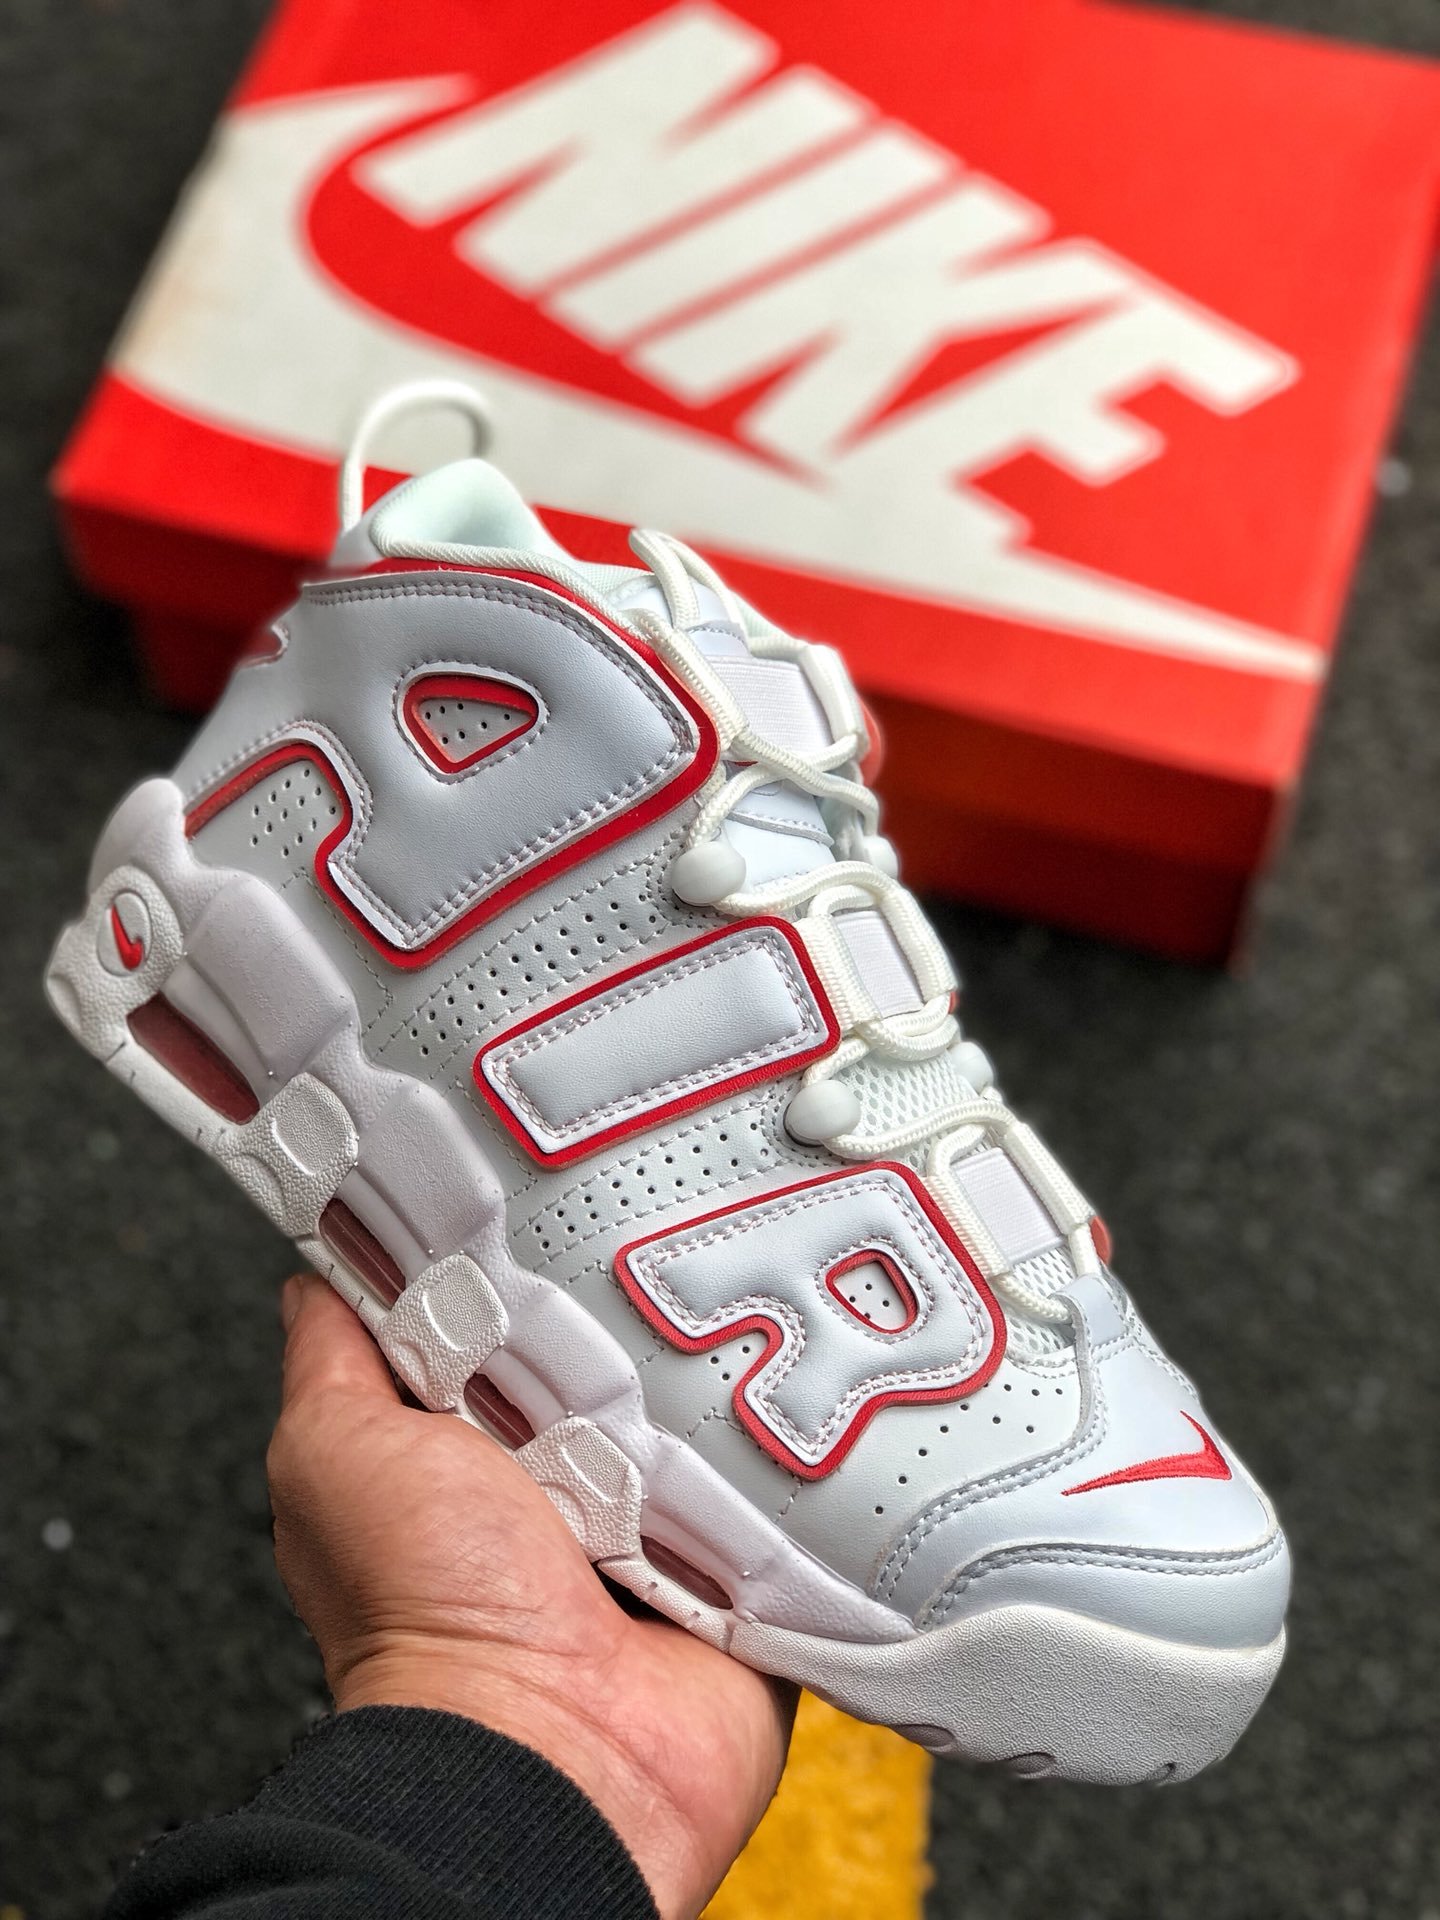 Nike air more uptempo red. Nike Air Uptempo. Nike Air more Uptempo. Nike more Uptempo. Nike Air Suptempo.